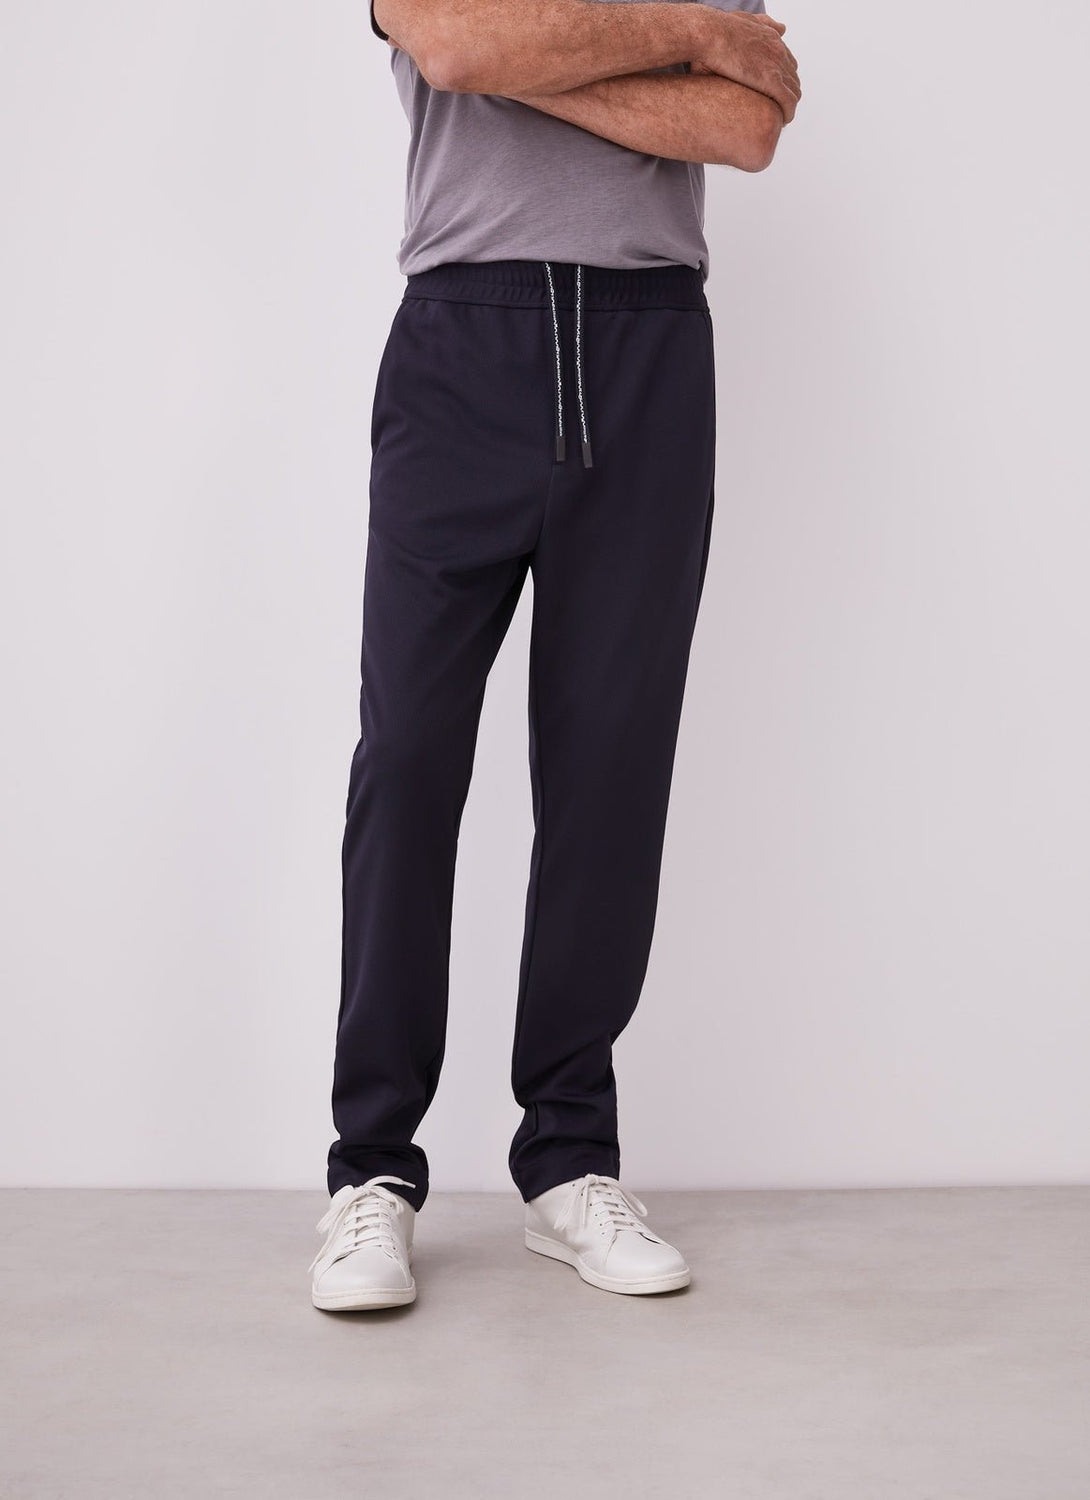 Men Trousers | Navy Blue Trousers With Elastic Waist by Spanish designer Adolfo Dominguez